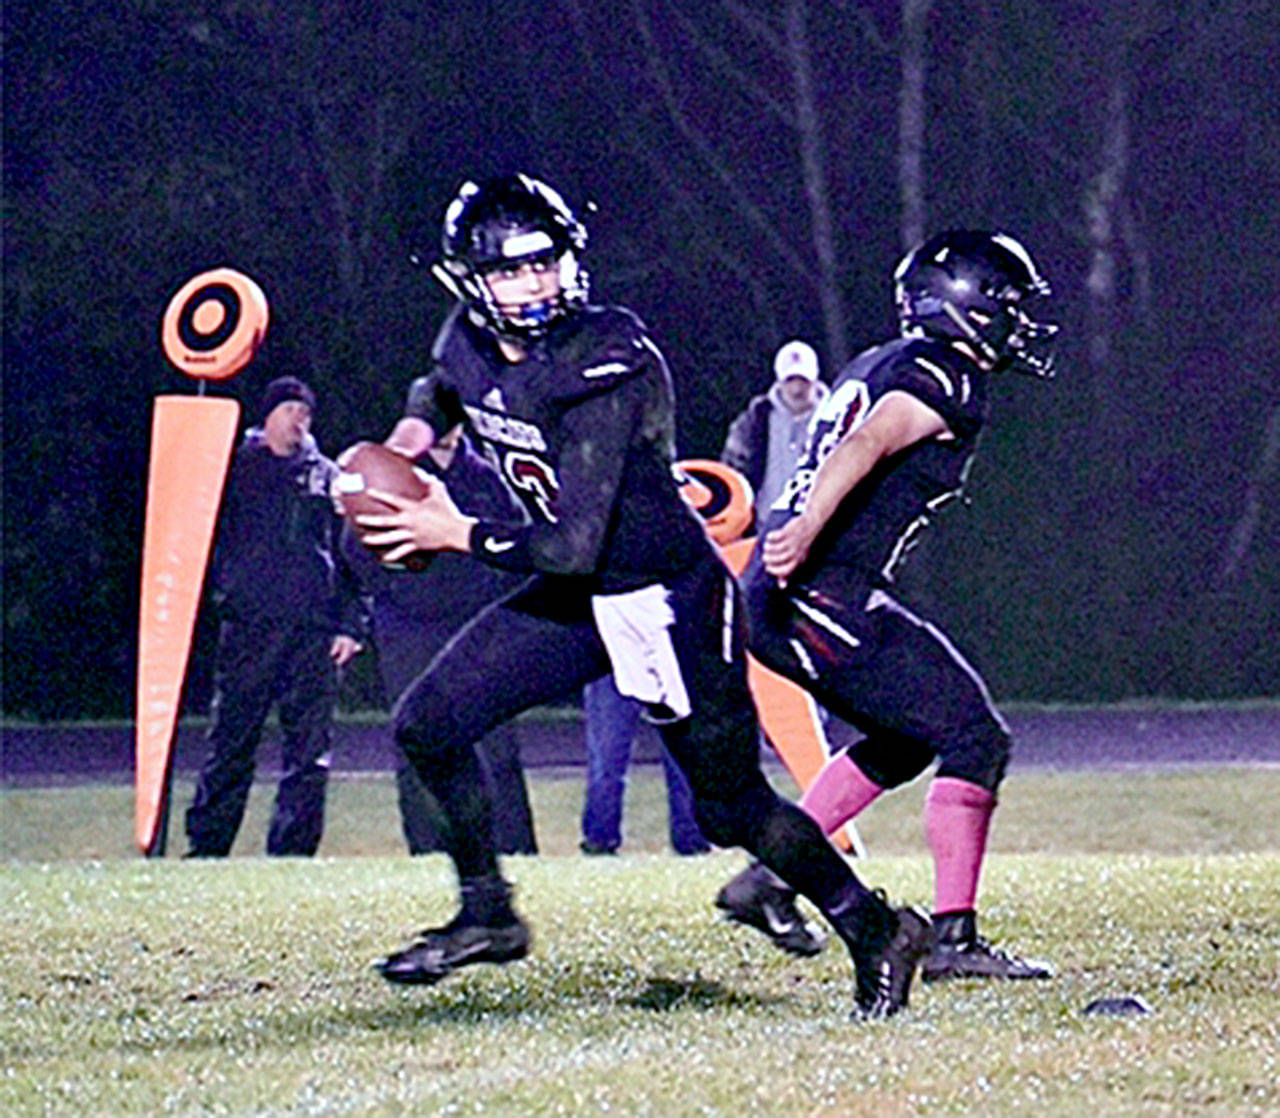 Ocosta quarterback Cole Hatton, left, drops back to pass during last week’s victory over Raymond. The undefeated Wildcats face Pe Ell-Willapa Valley on Friday for first place in the 2B Pacific League’s Coastal division. (Submitted photo)